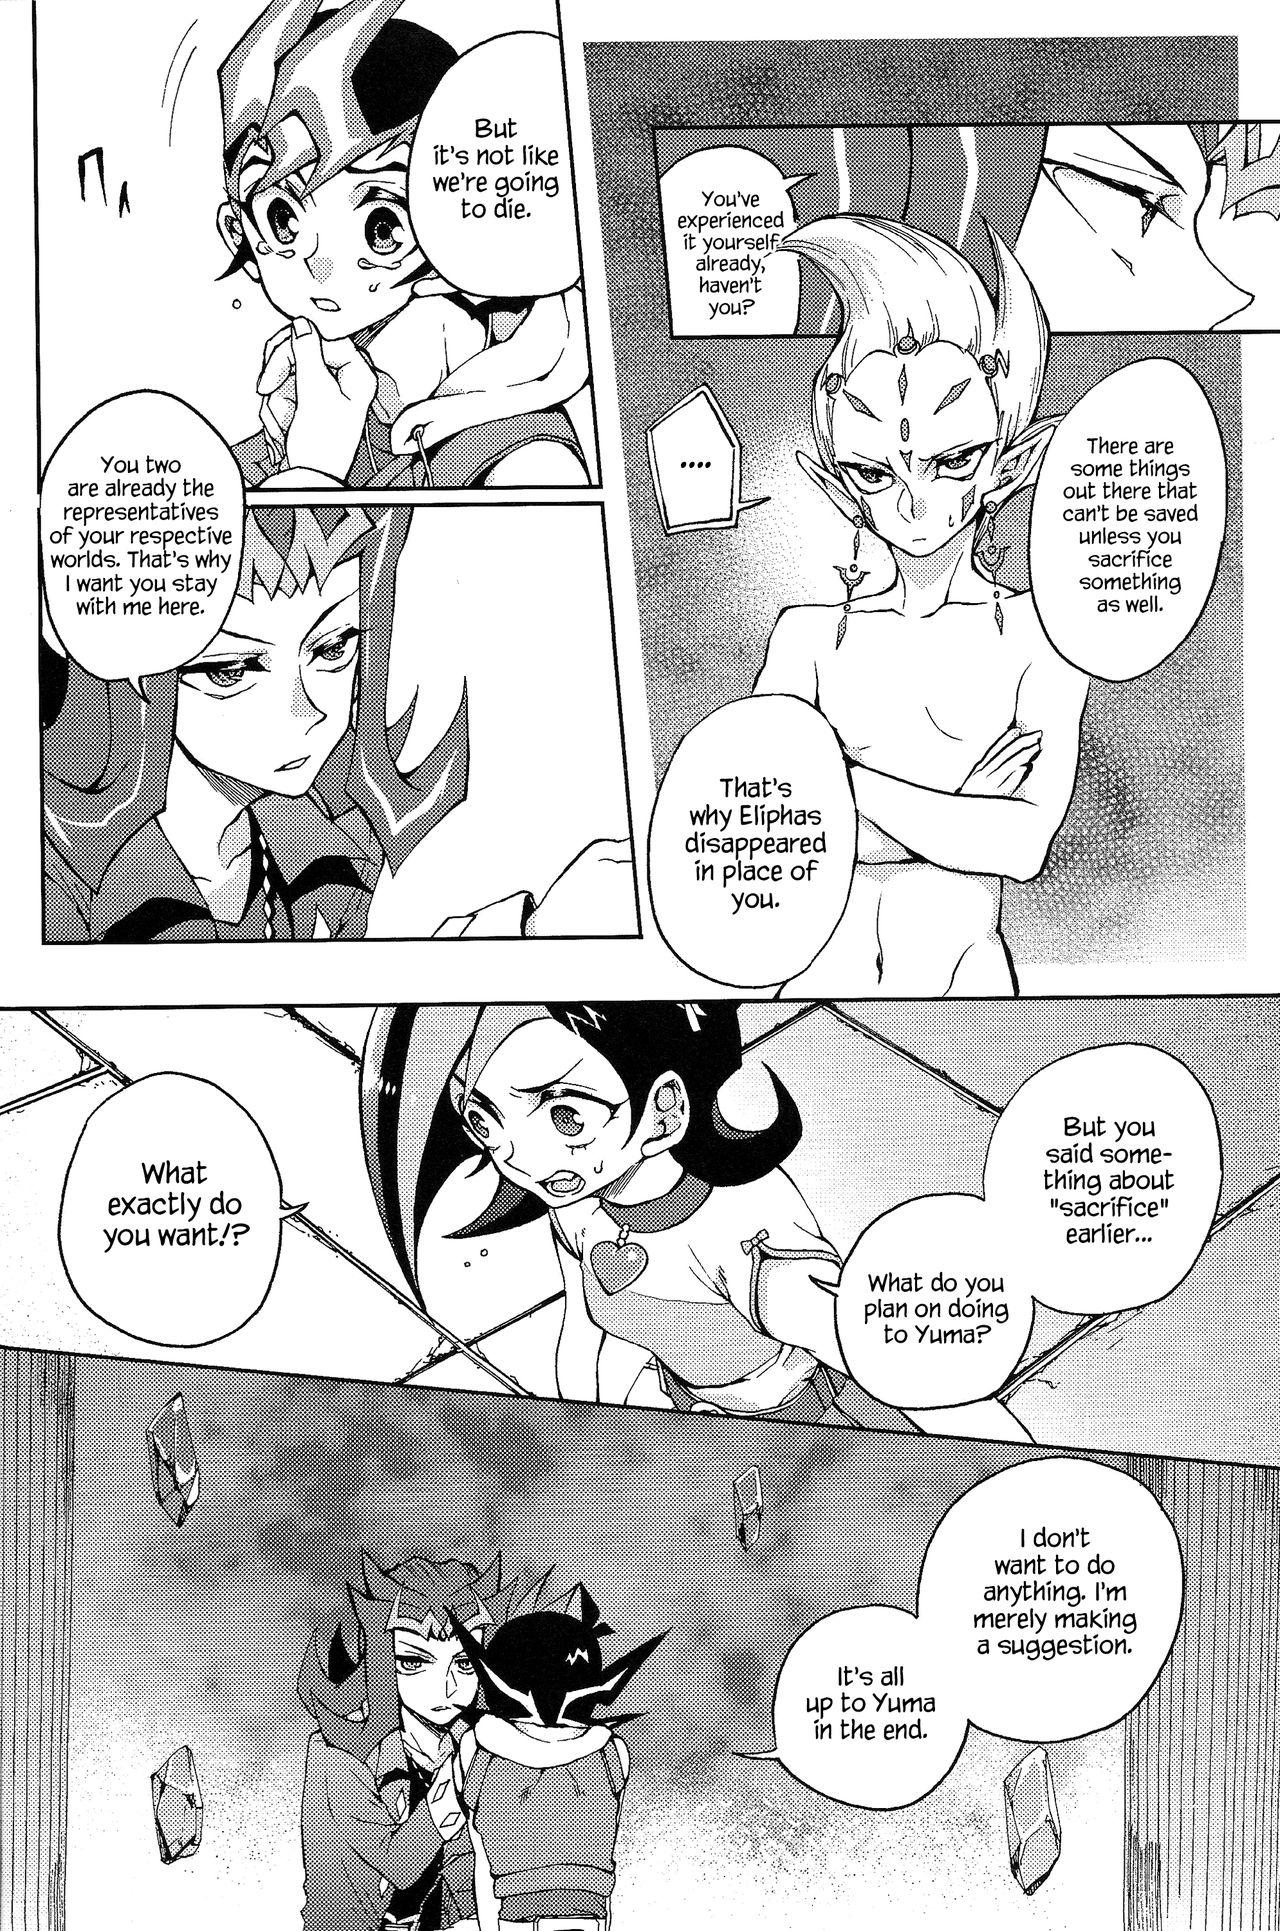 Black Woman Ultimate Eden - Yu-gi-oh zexal Tied - Page 11